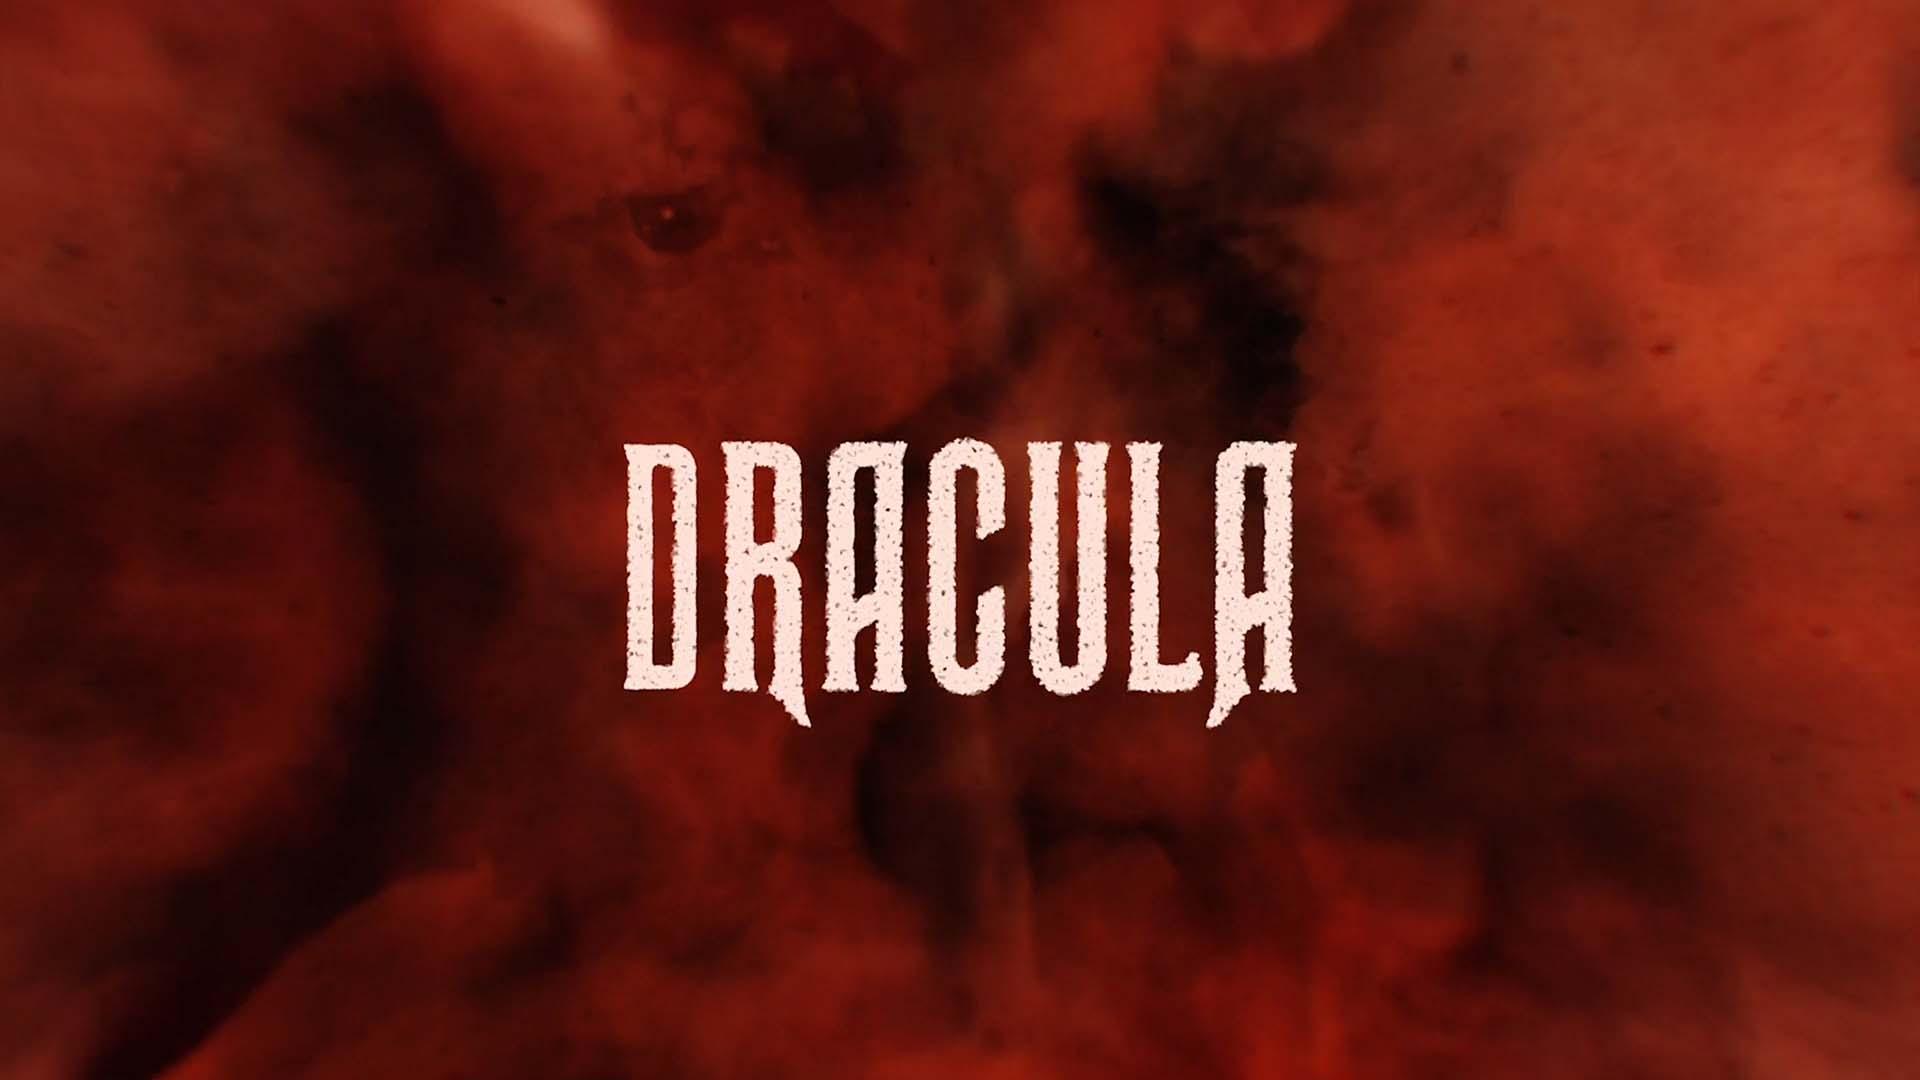 Peter Anderson Studio Dracula Title Sequence 5